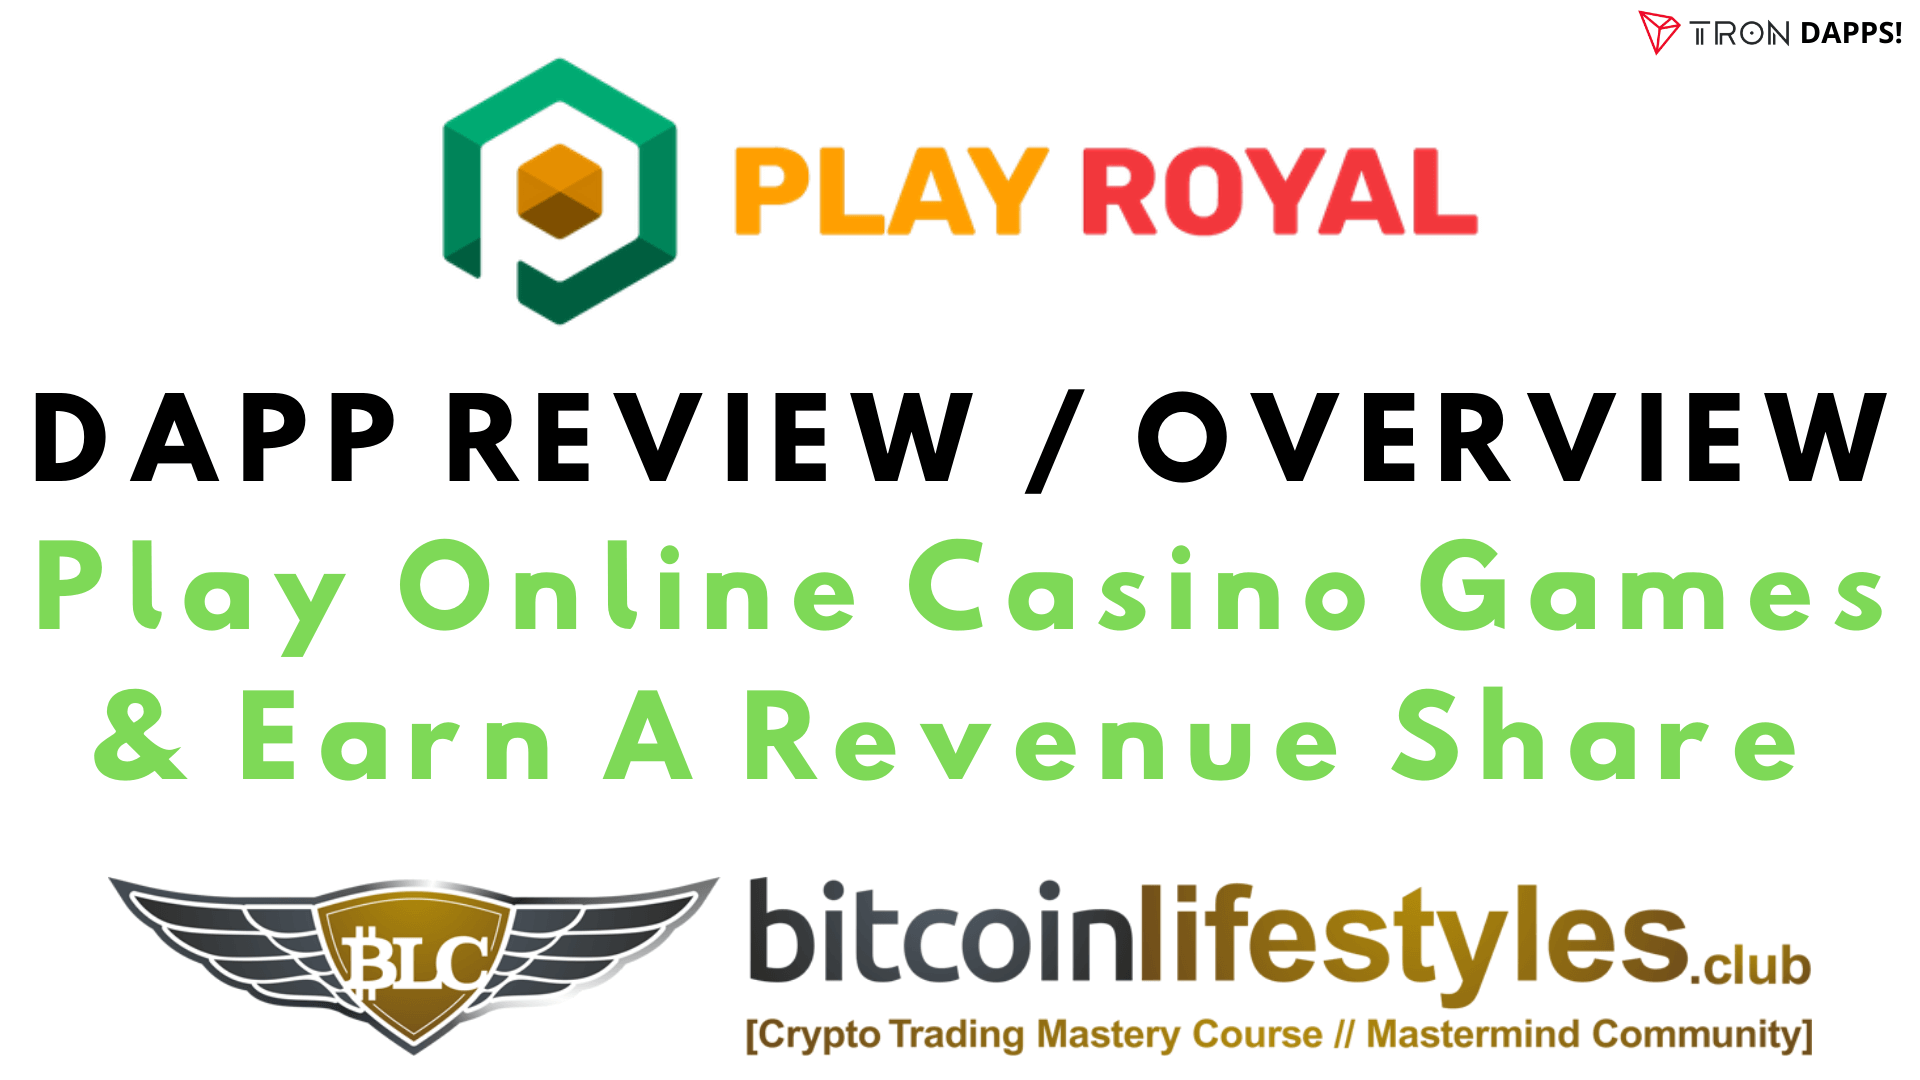 Play Royal Online Casino Games DAPP Review / Overview [Passive Crypto Income]